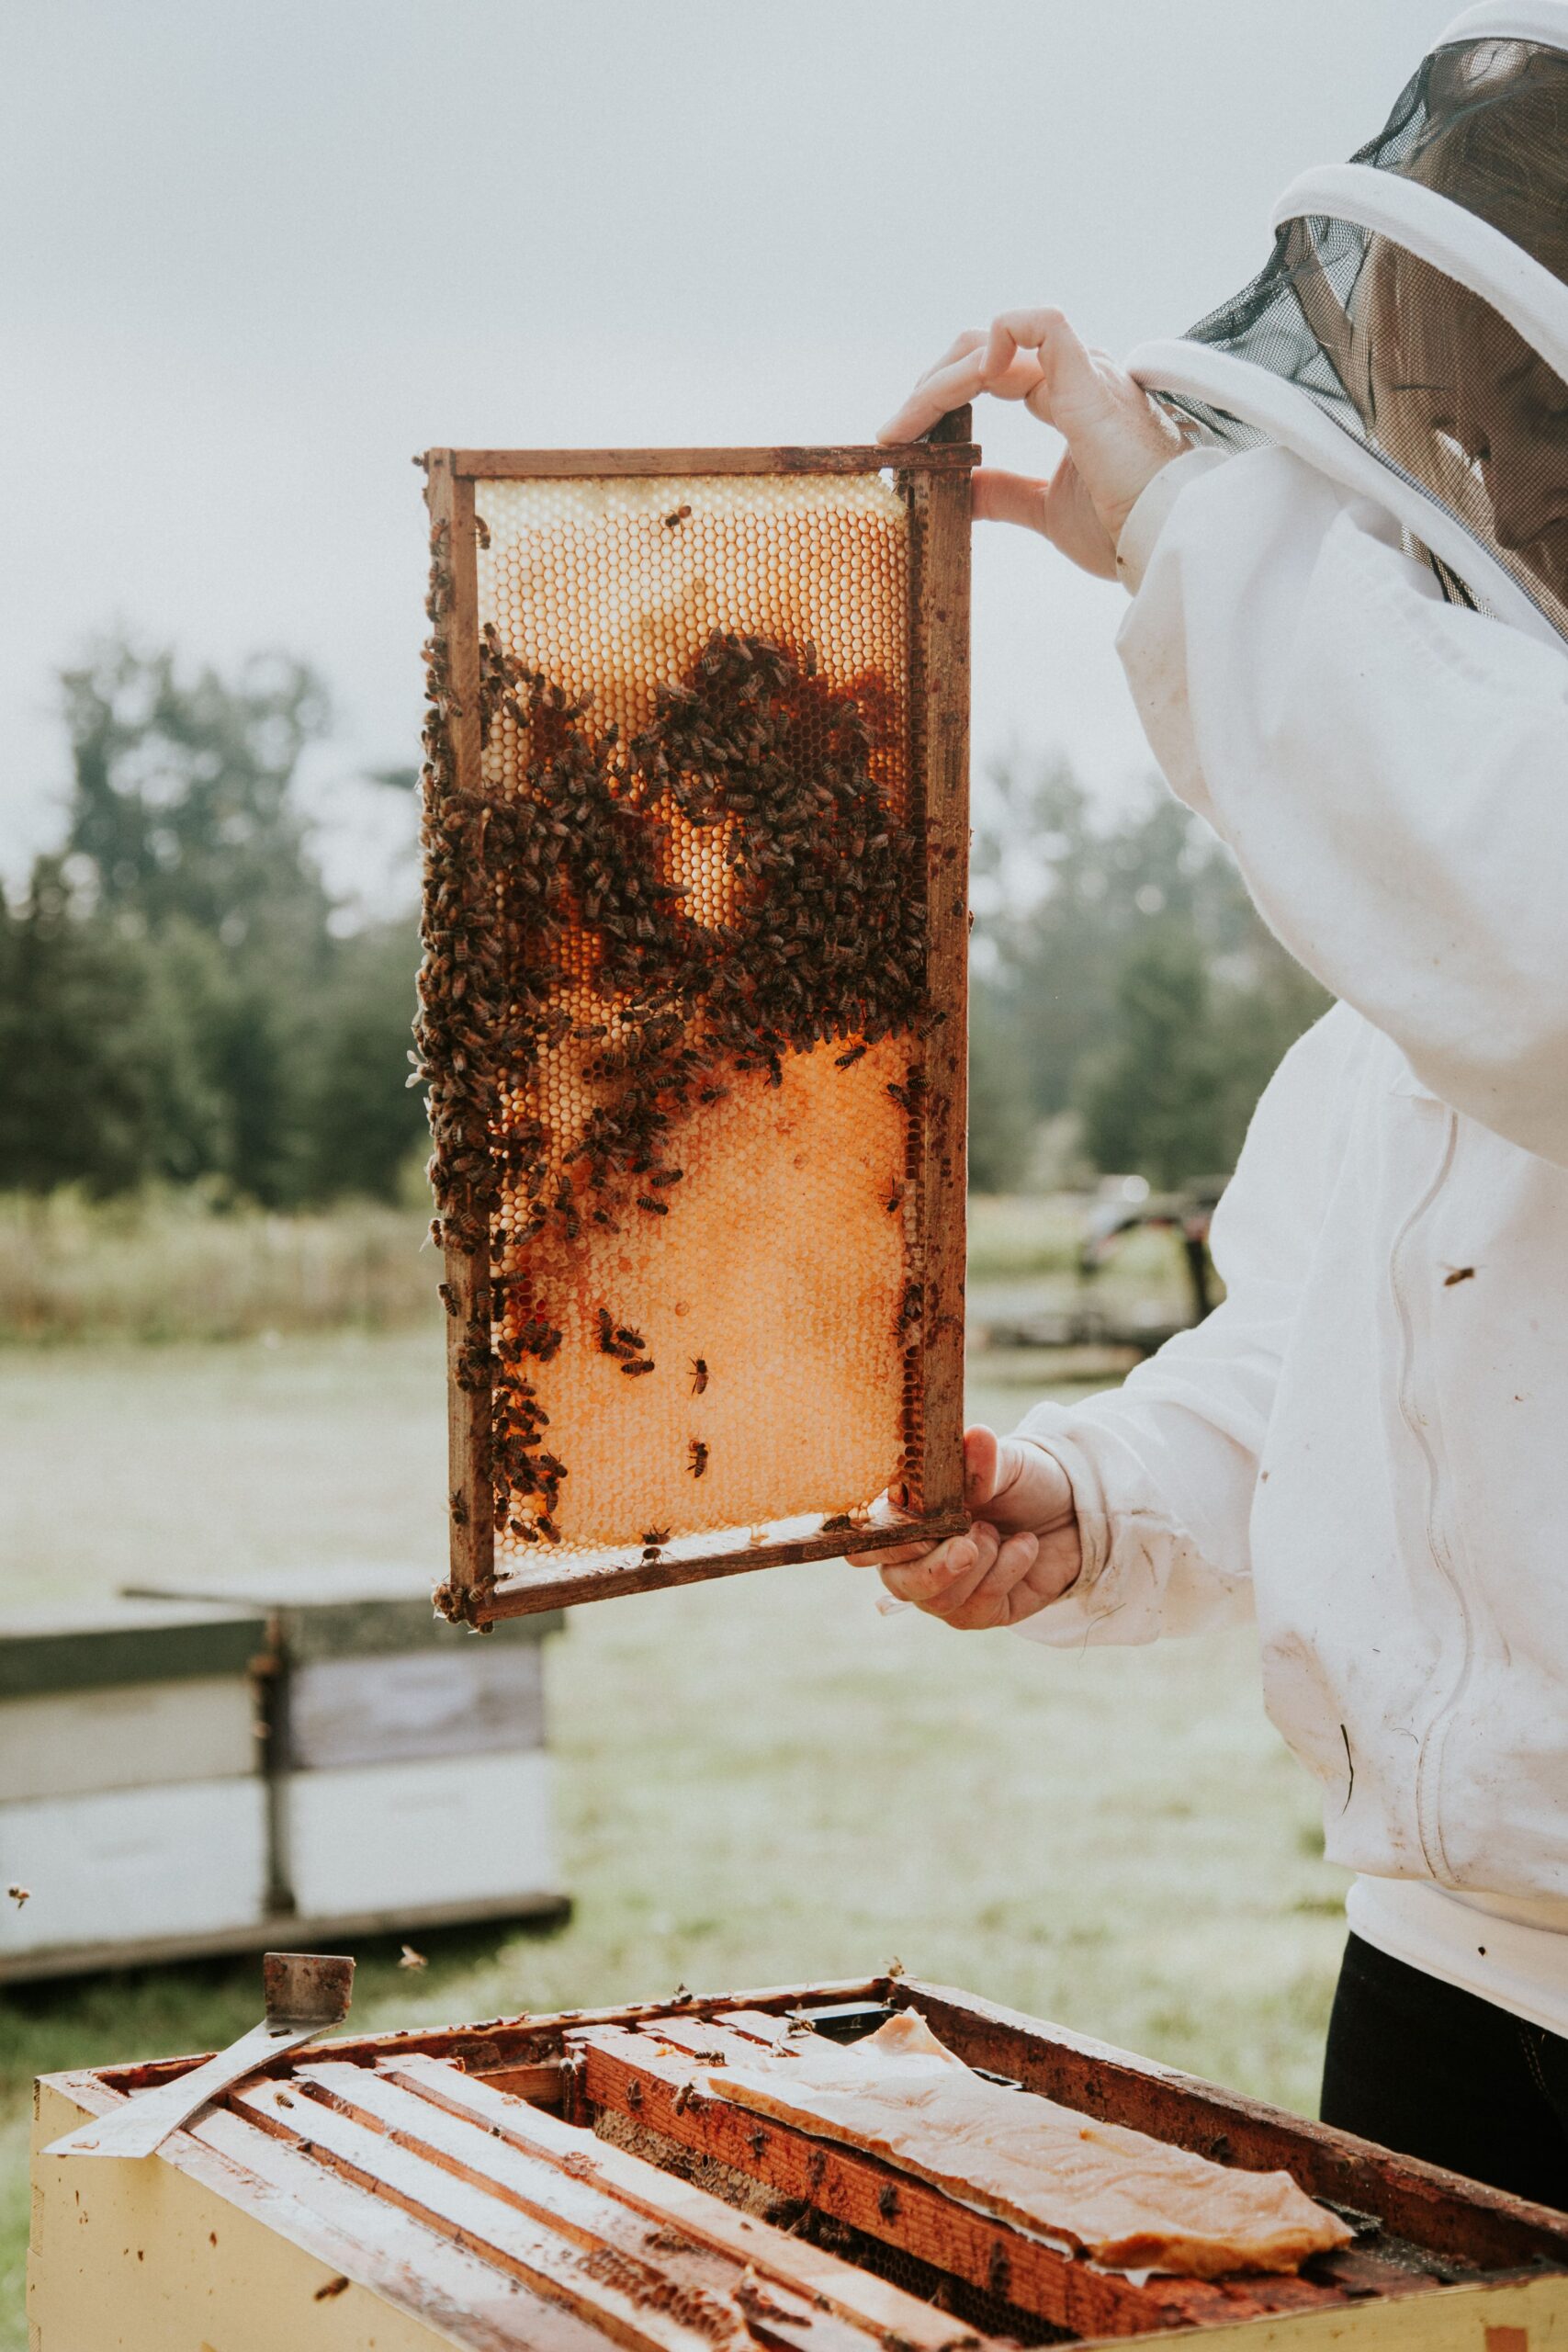 A beekeeper carefully holds a frame of honey, showcasing the golden goodness produced by the hardworking bees.